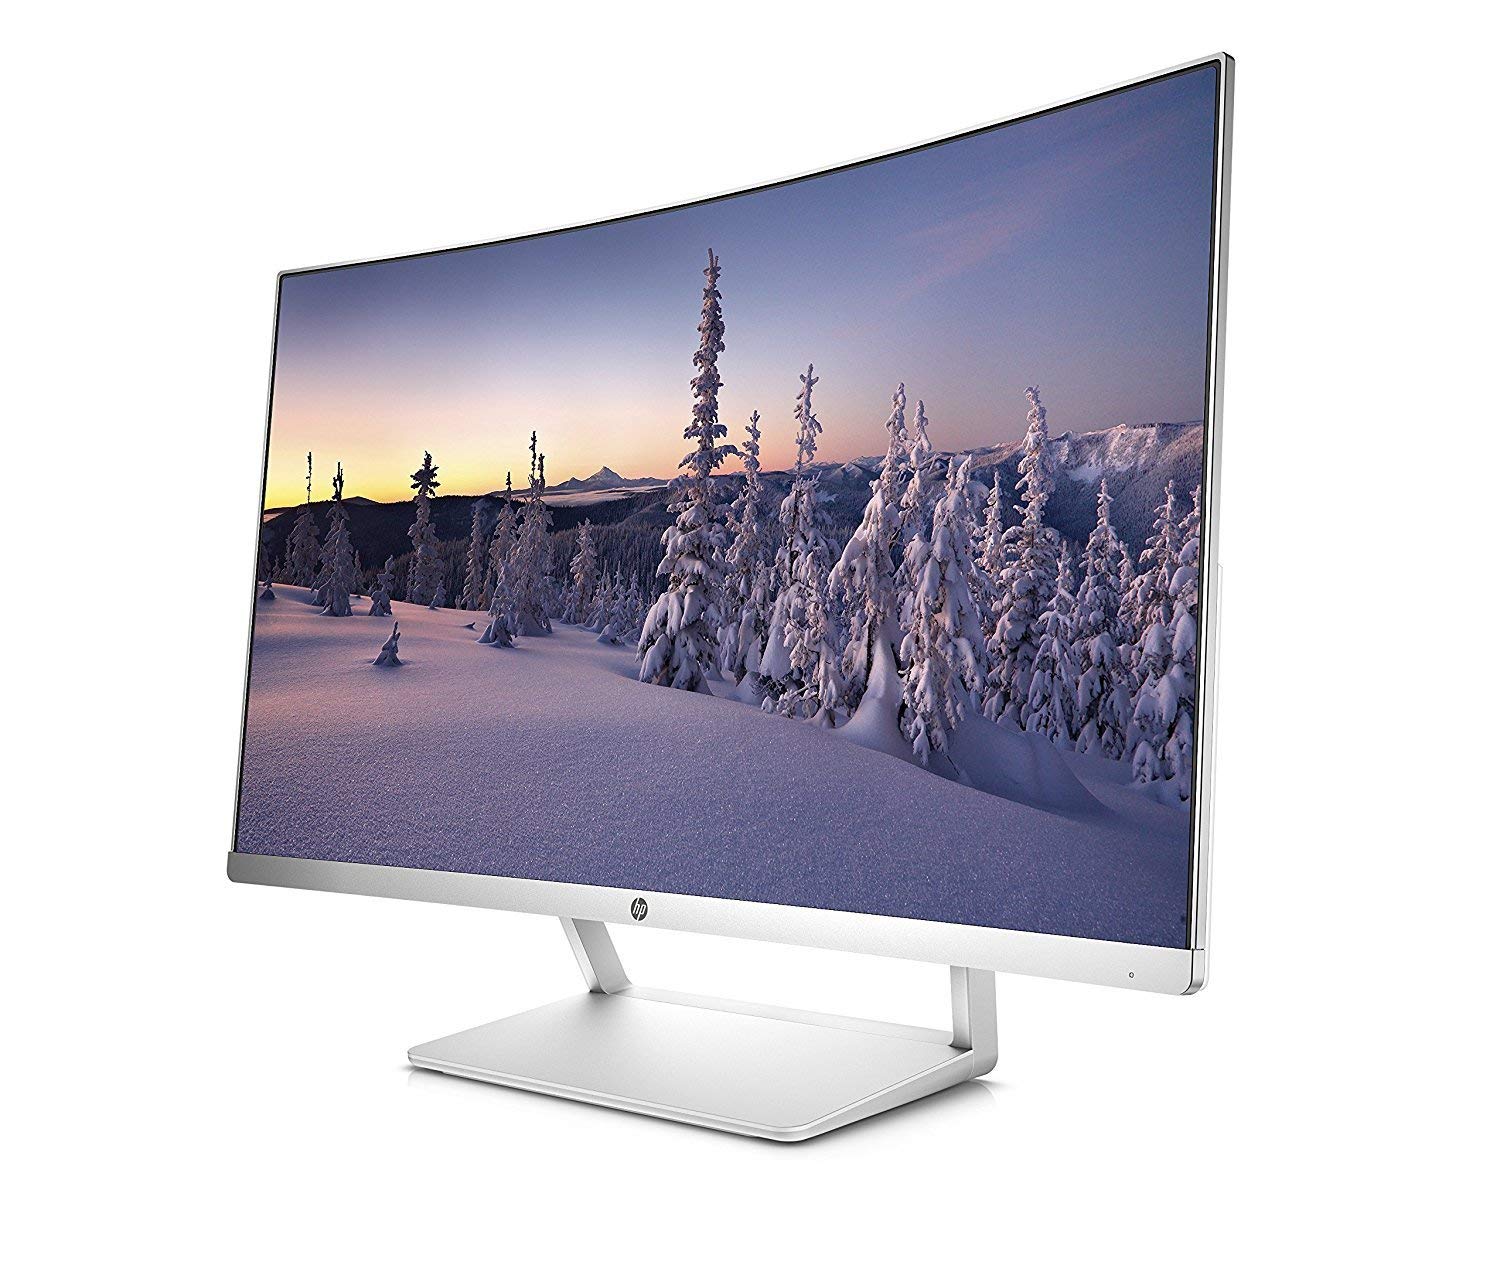 HP 27SC1 27" Curved LED Monitor